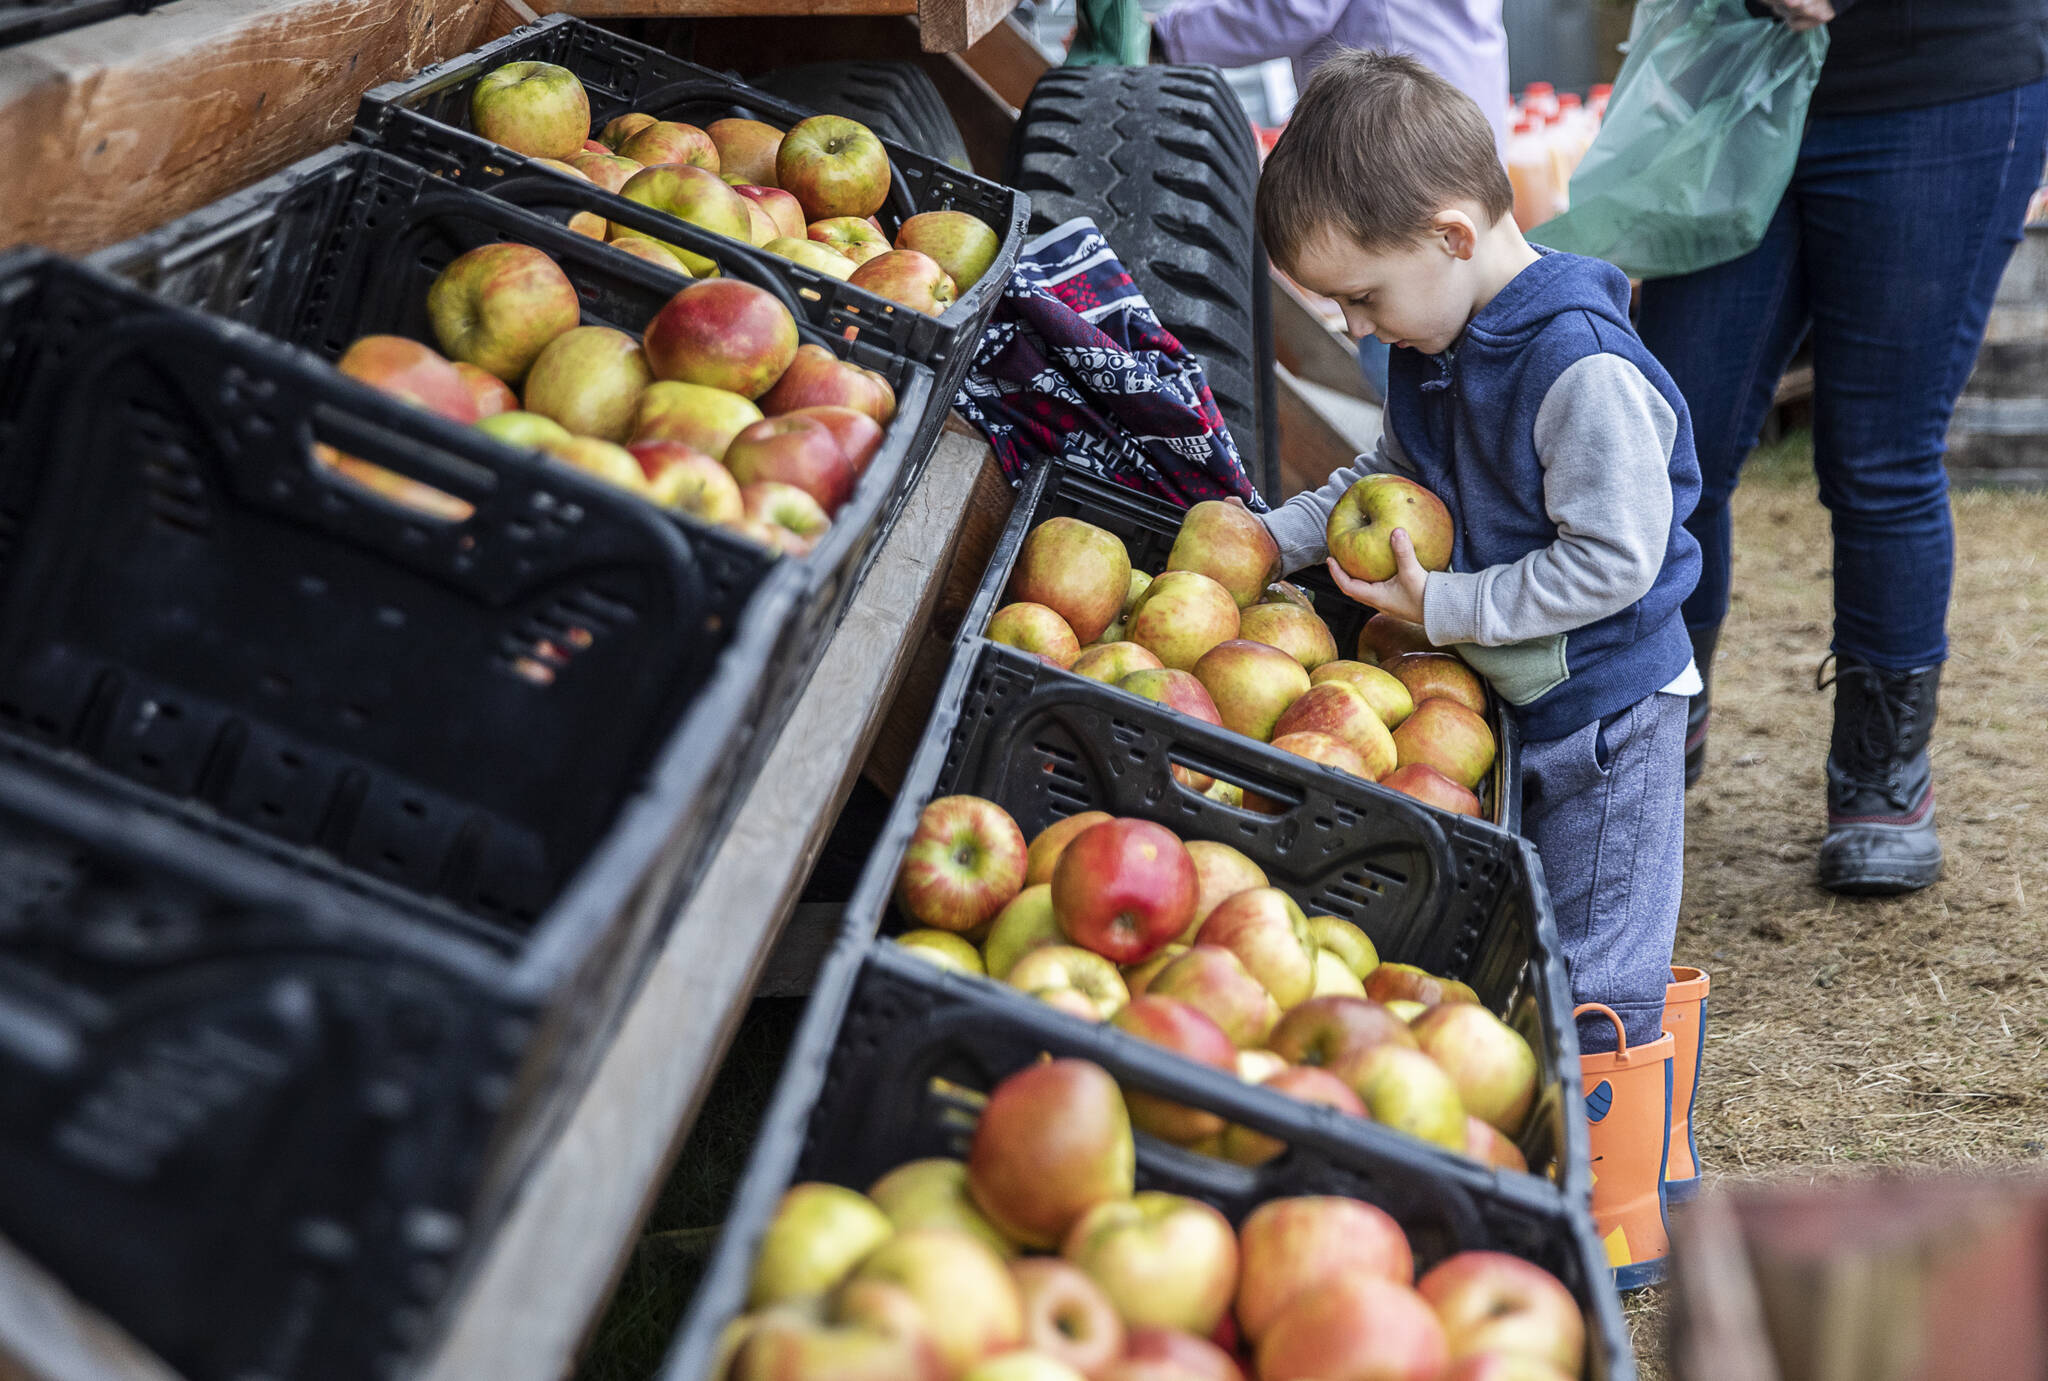 A boy picks out Honeycrisp apples for his family at Swans Trail Farms in Snohomish, Washington. Sound Publishing File Photo